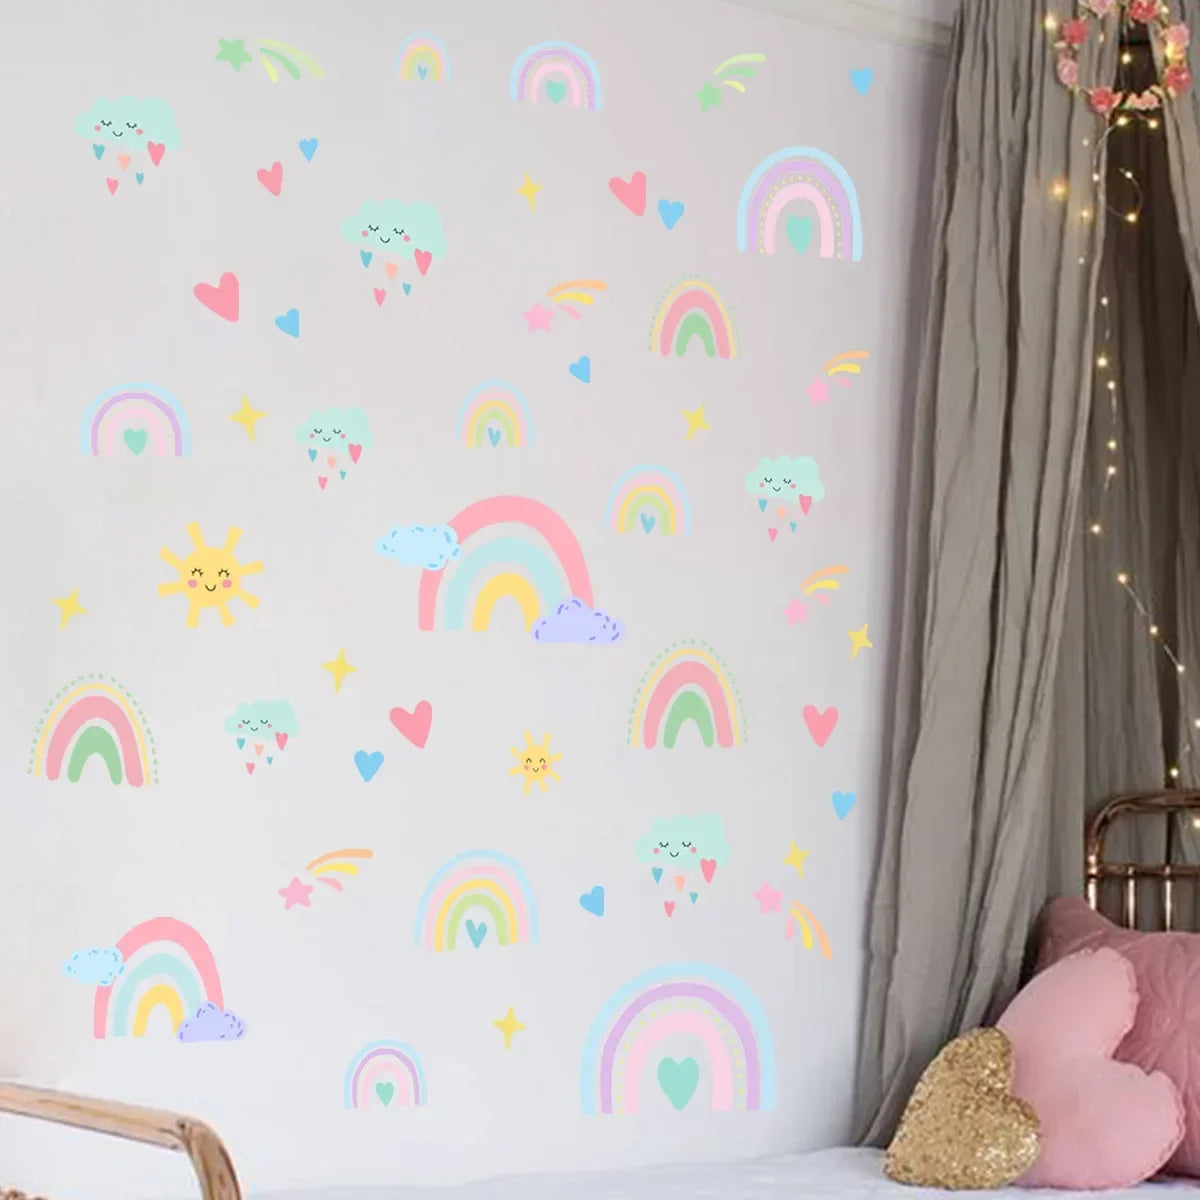 Pink Rainbow Clouds & Love Hearts Cute Wall Stickers For Girl's Room Removable Peel & Stick PVC Vinyl Wall Decals For Creative DIY Home Decor